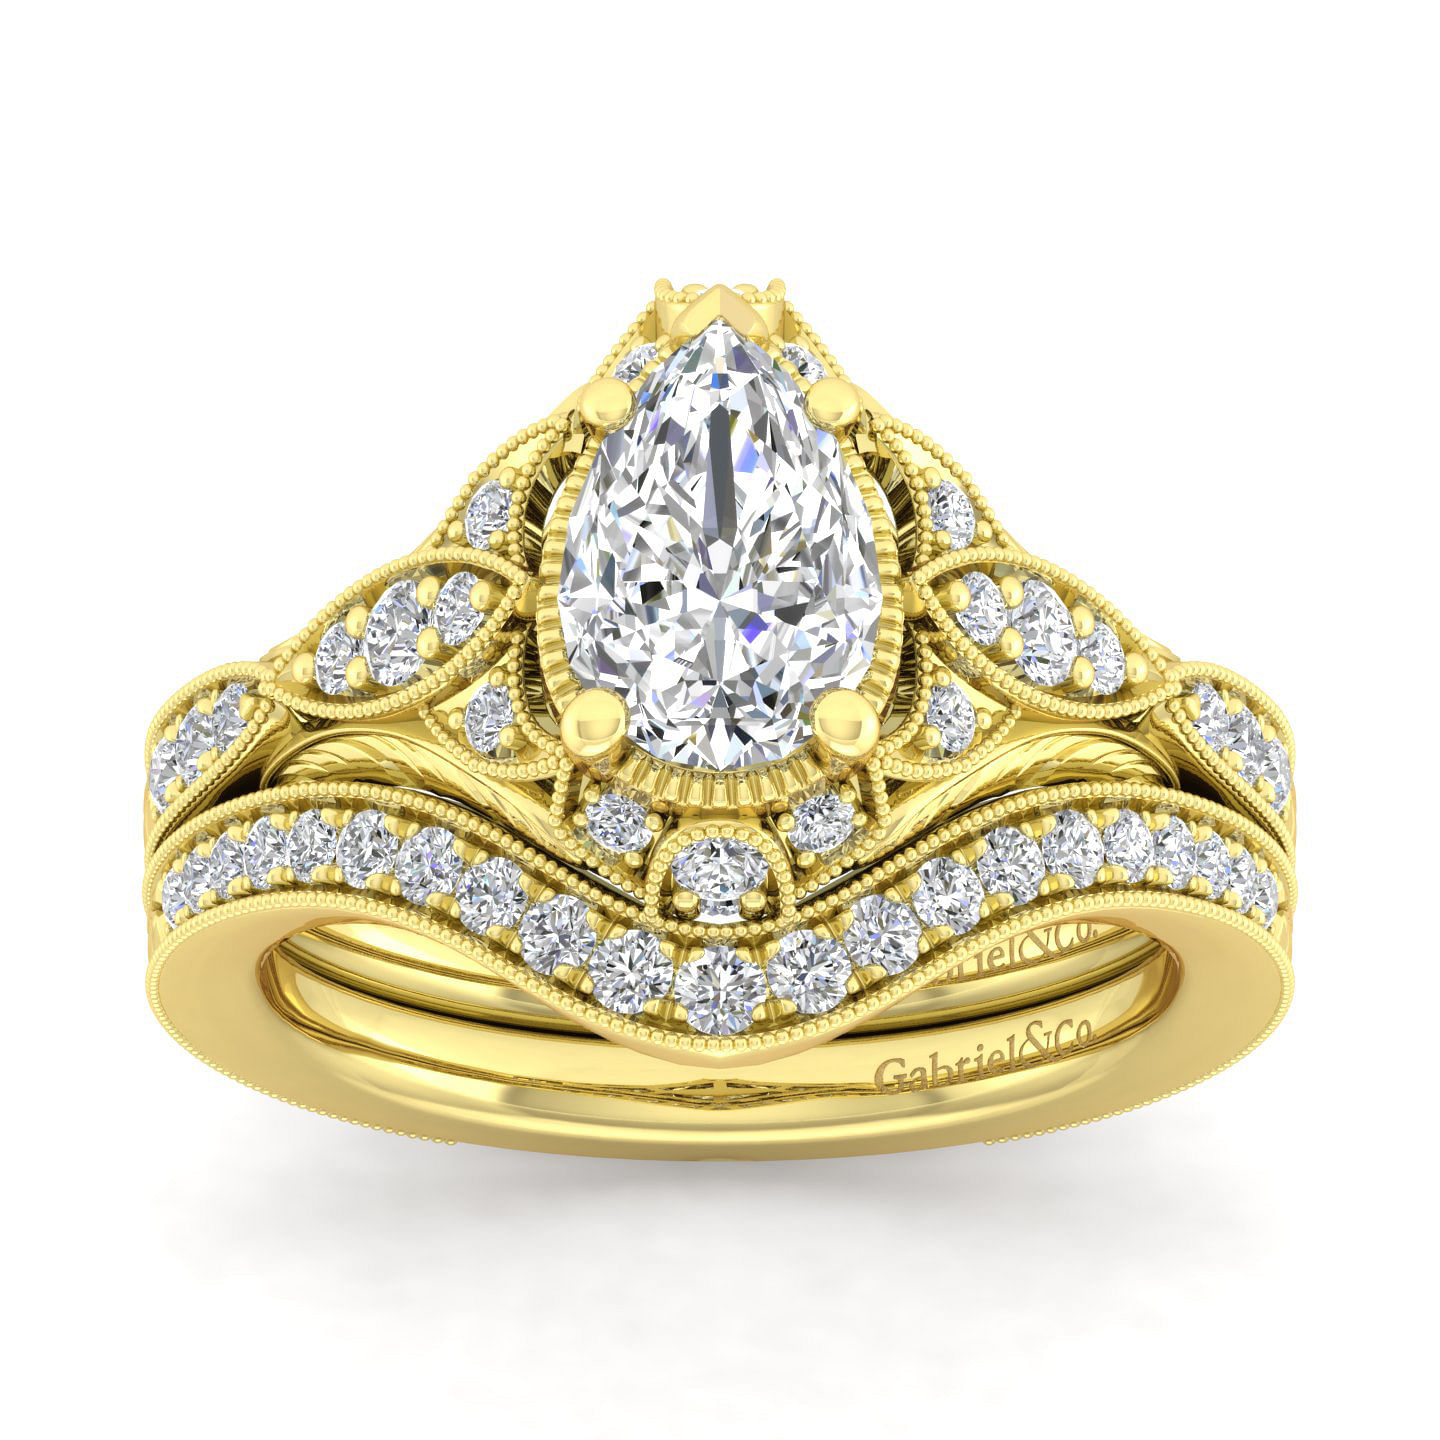 Unique 14K Yellow Gold Vintage Inspired Pear Shape Diamond Halo Engagement Ring